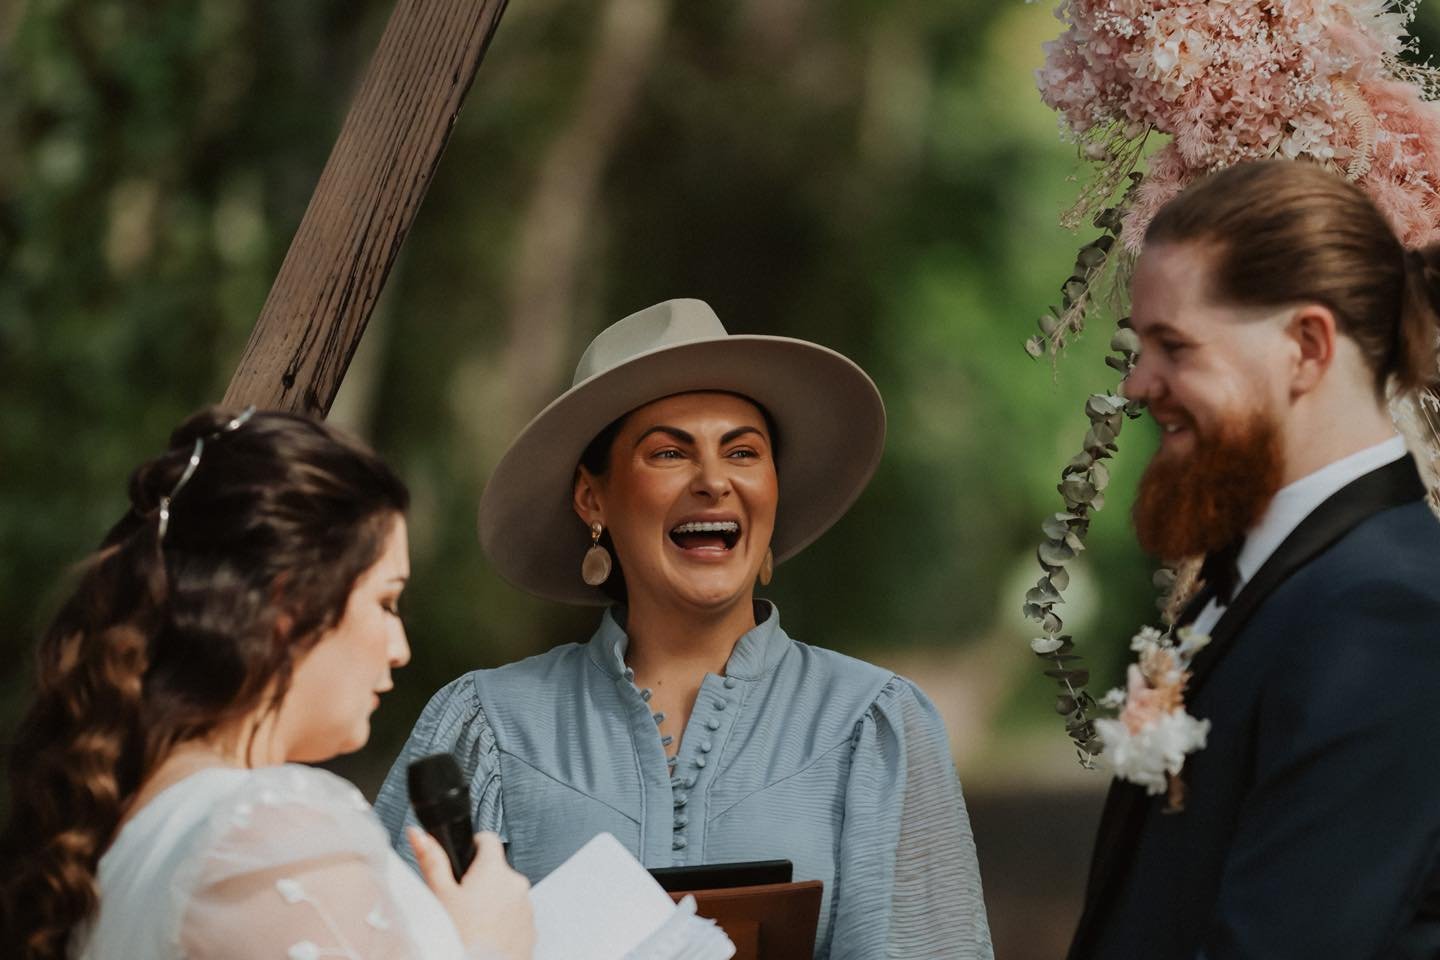 Clearly I was enjoying this ceremony way too much 🤣🤓

#celebrant #sydneycelebrant #sydneycelebrants #sydneywedding #sydneyweddings #glenworthvalleycelebrant #glenworthvalleyweddings #centralcoastcelebrant #centralcoastcelebrants #centralcoastweddin